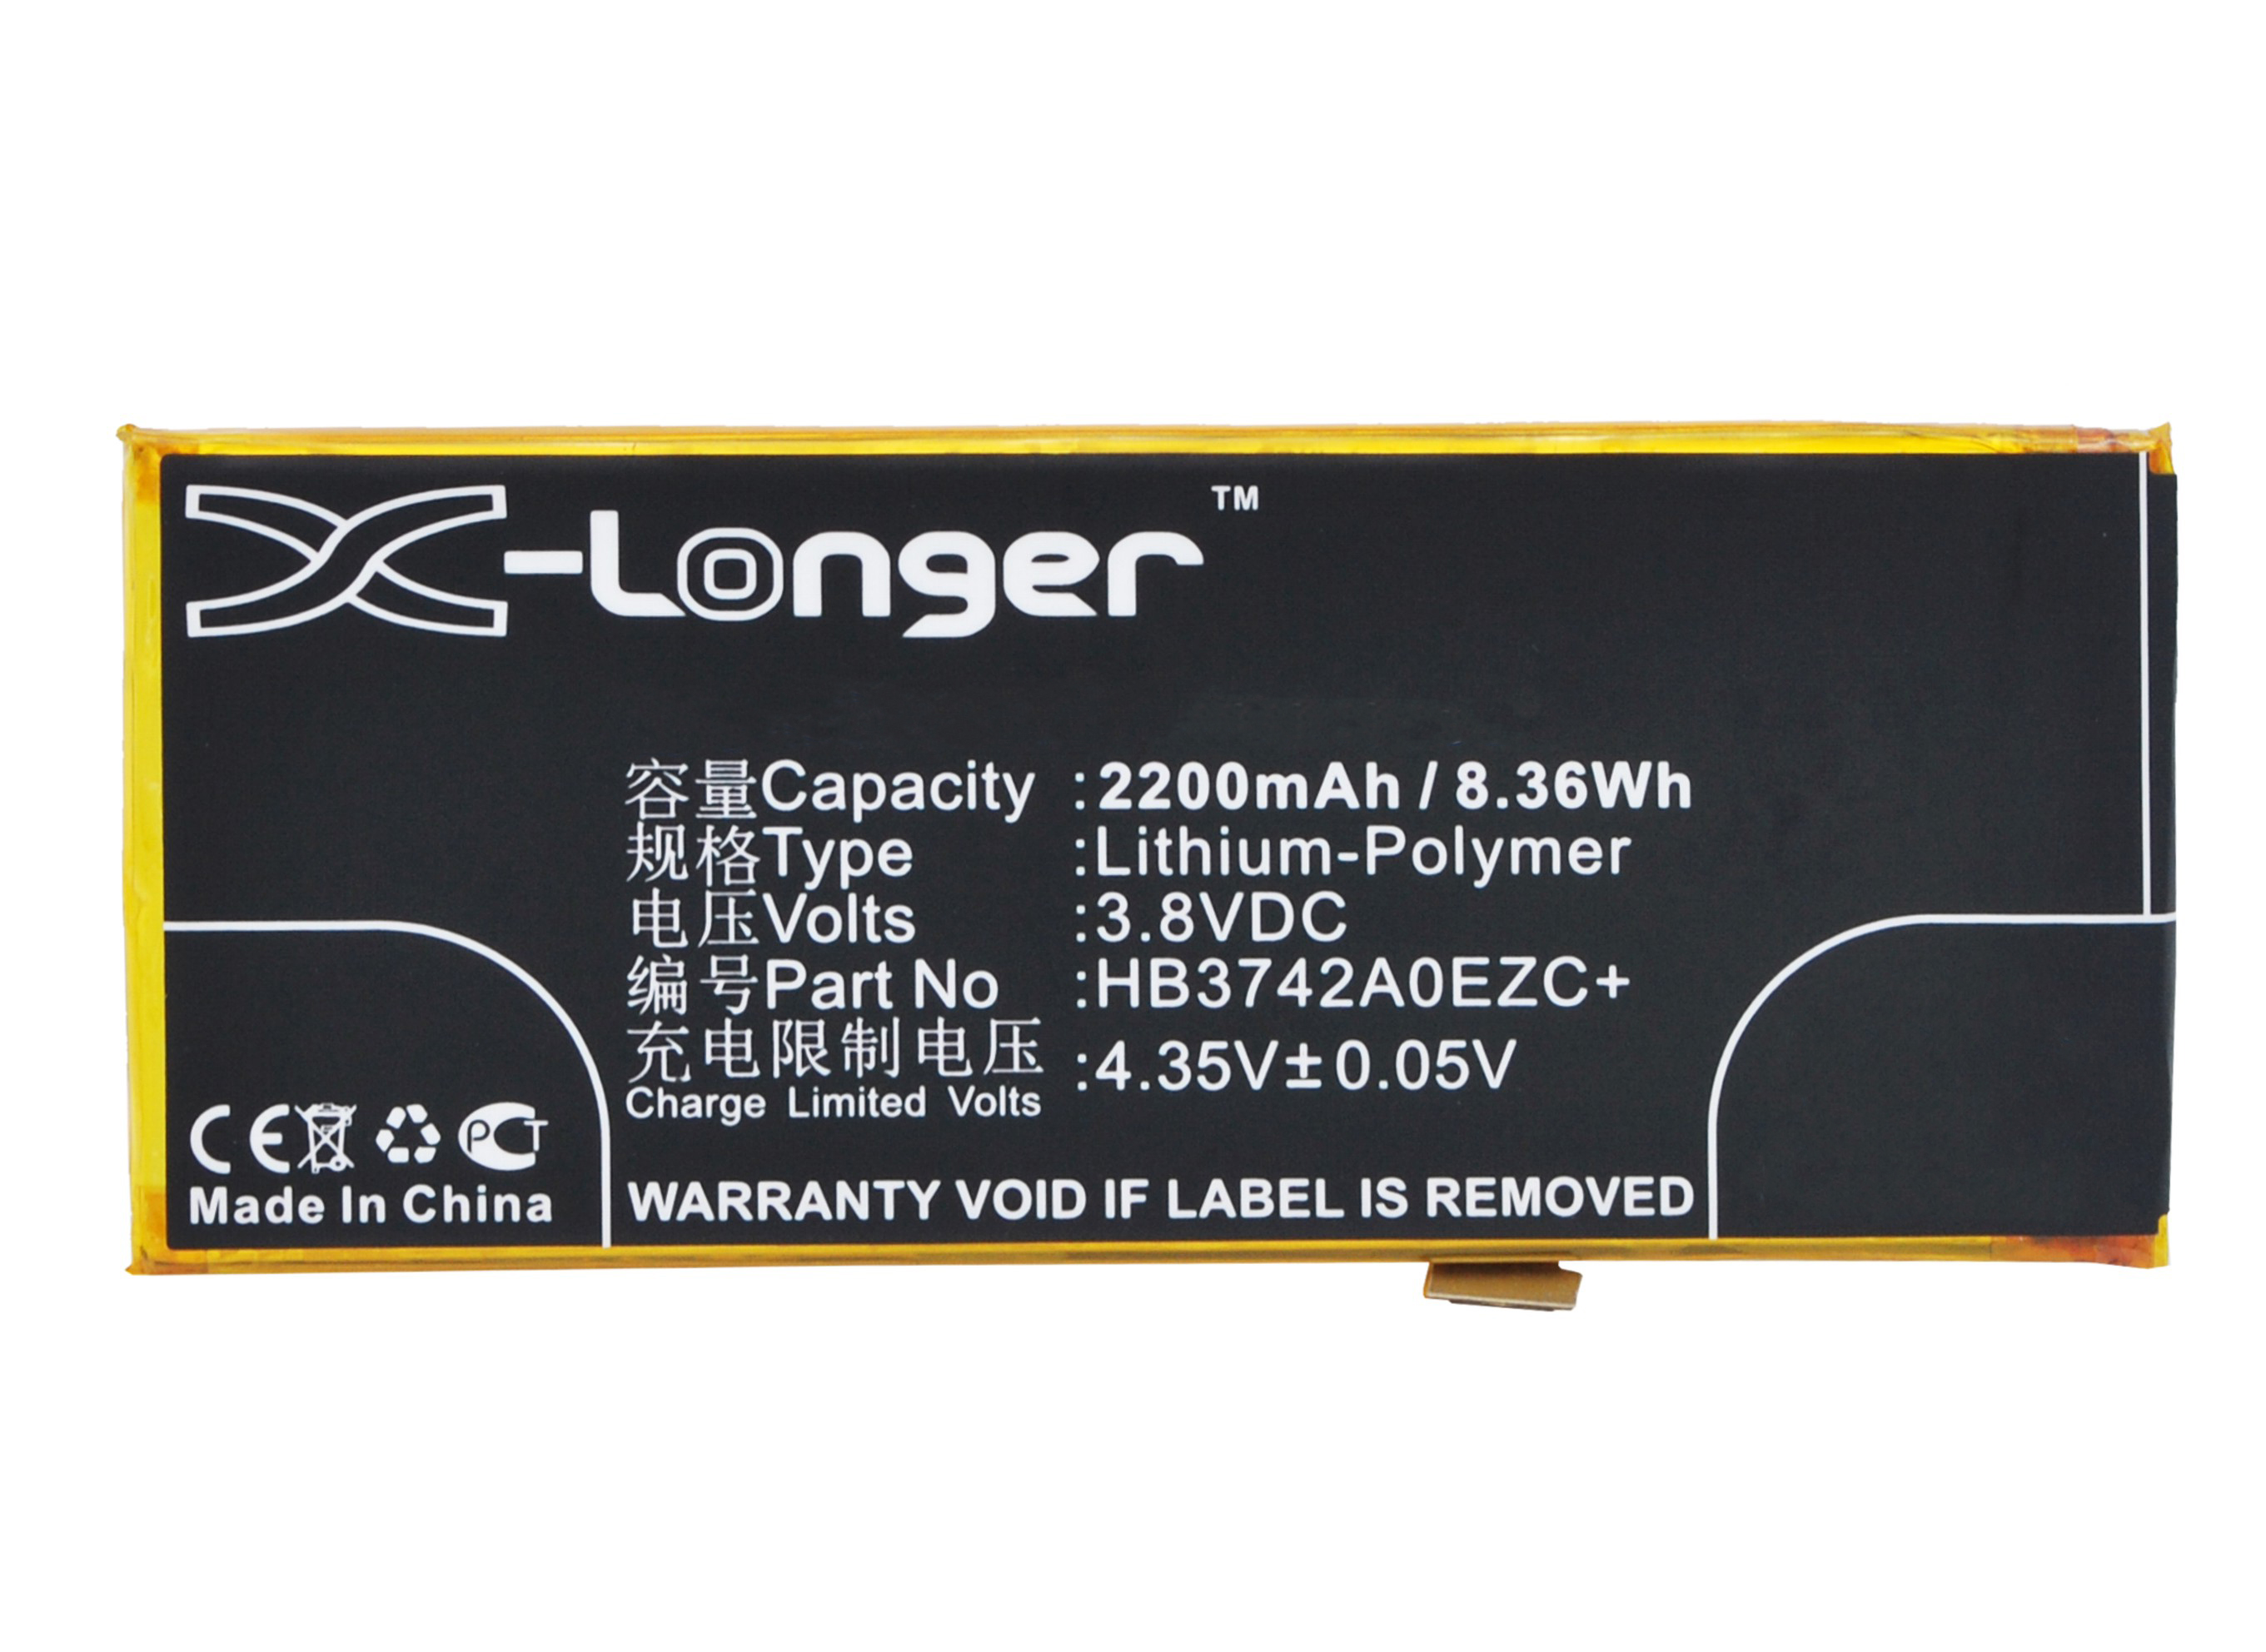 Synergy Digital Battery Compatible With Huawei HB3742A0EZC Cellphone Battery - (Li-Pol, 3.8V, 2200 mAh / 8.36Wh)